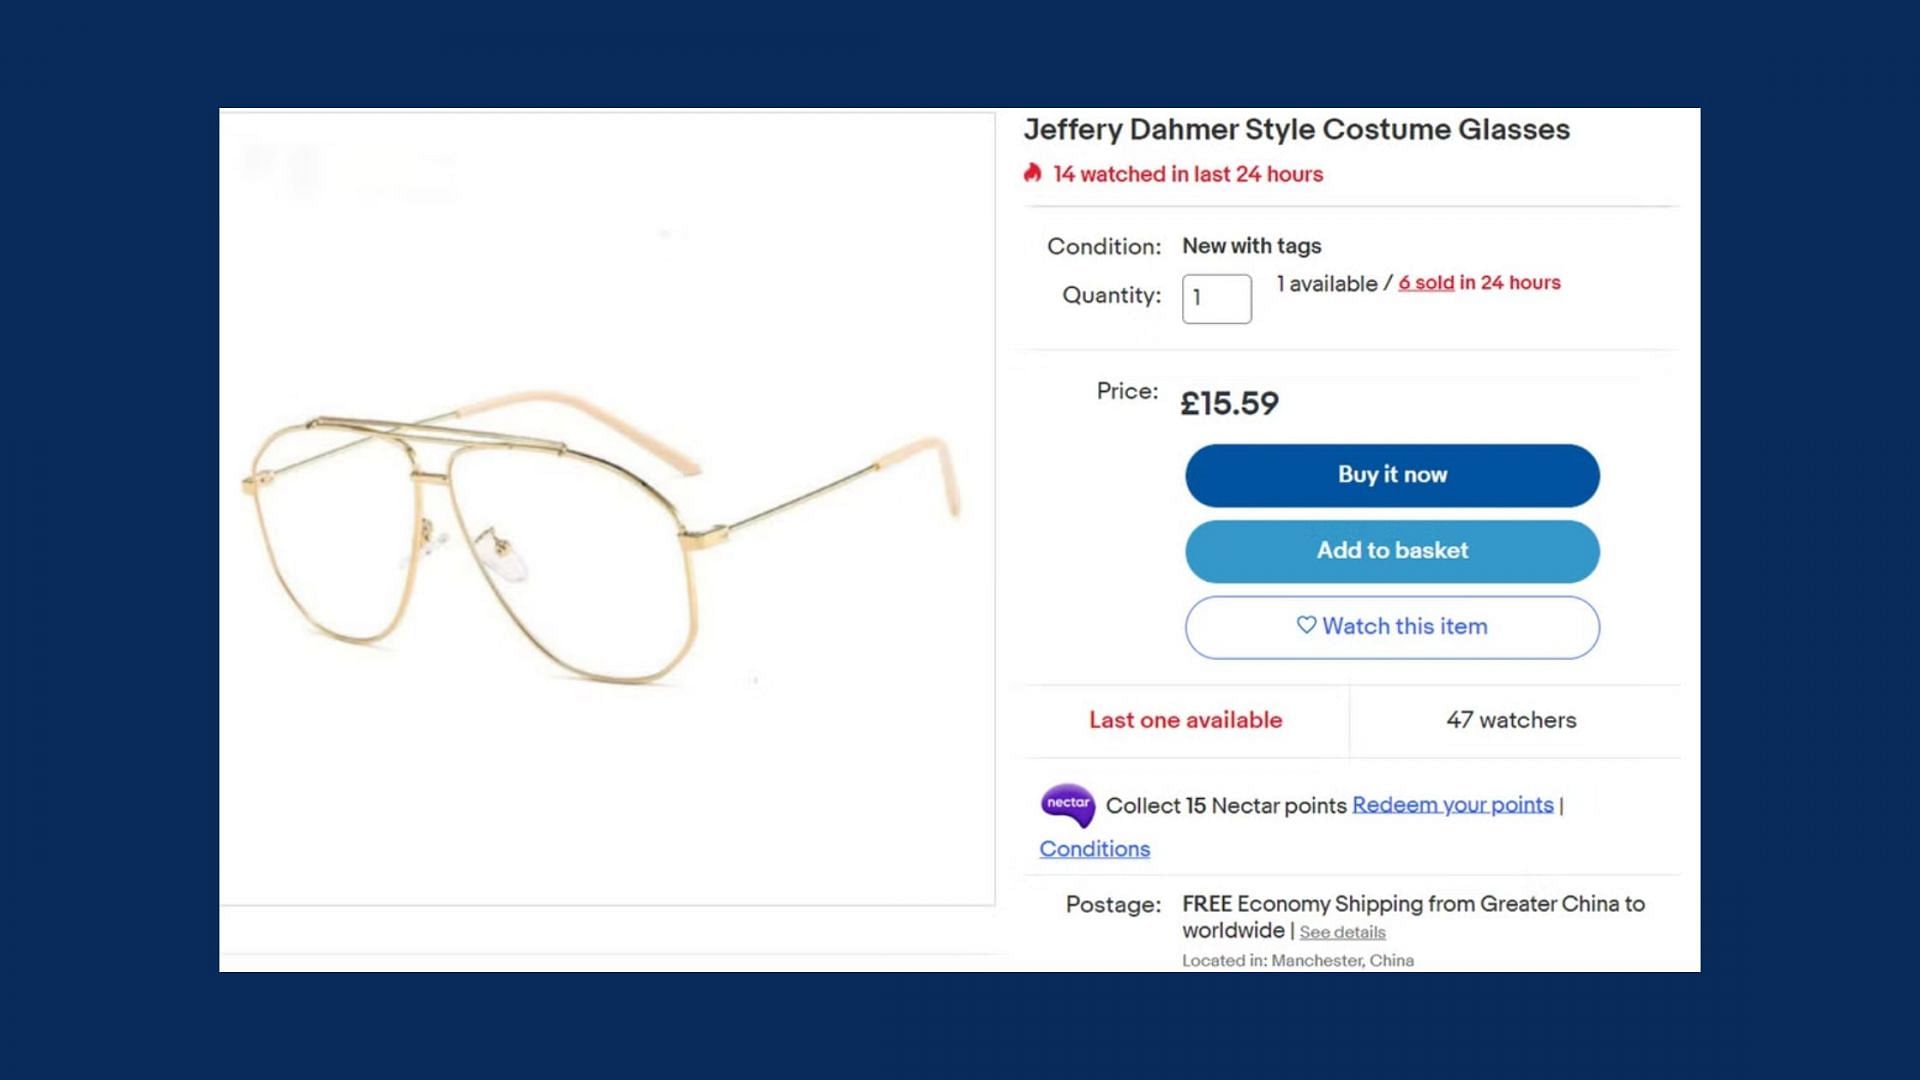 The Dahmer replica glasses sold on some websites. (image via Getty Images)